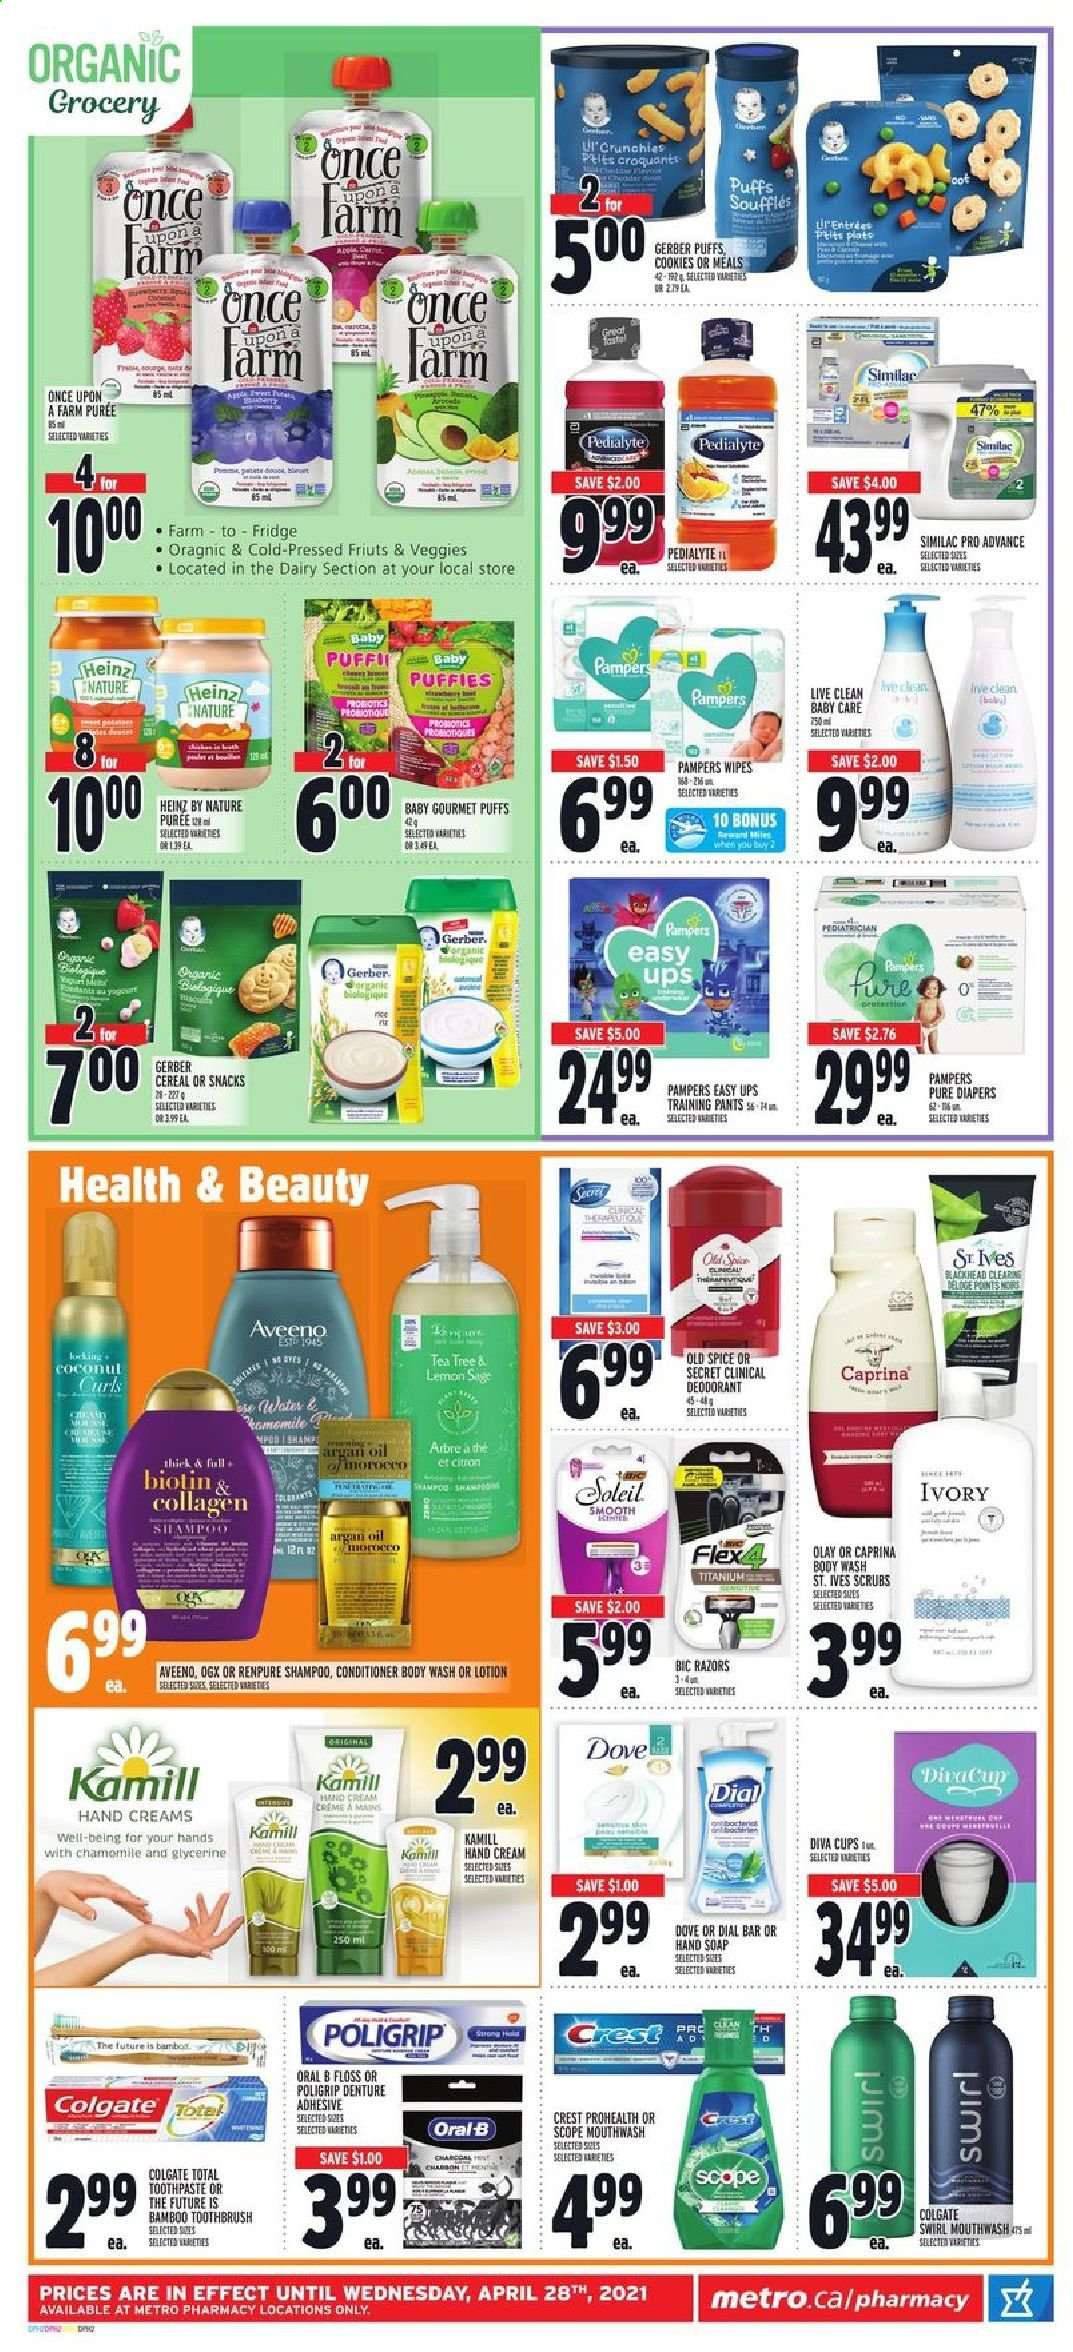 thumbnail - Metro Flyer - April 01, 2021 - April 07, 2021 - Sales products - puffs, cookies, Gerber, Heinz, cereals, rice, spice, oil, tea, Similac, wipes, pants, nappies, baby pants, Aveeno, body wash, hand soap, Dial, soap, toothbrush, toothpaste, mouthwash, Crest, Olay, OGX, conditioner, body lotion, hand cream, anti-perspirant, BIC, cup, tea tree, Biotin, shampoo, Pampers, Old Spice, Oral-B, deodorant. Page 10.